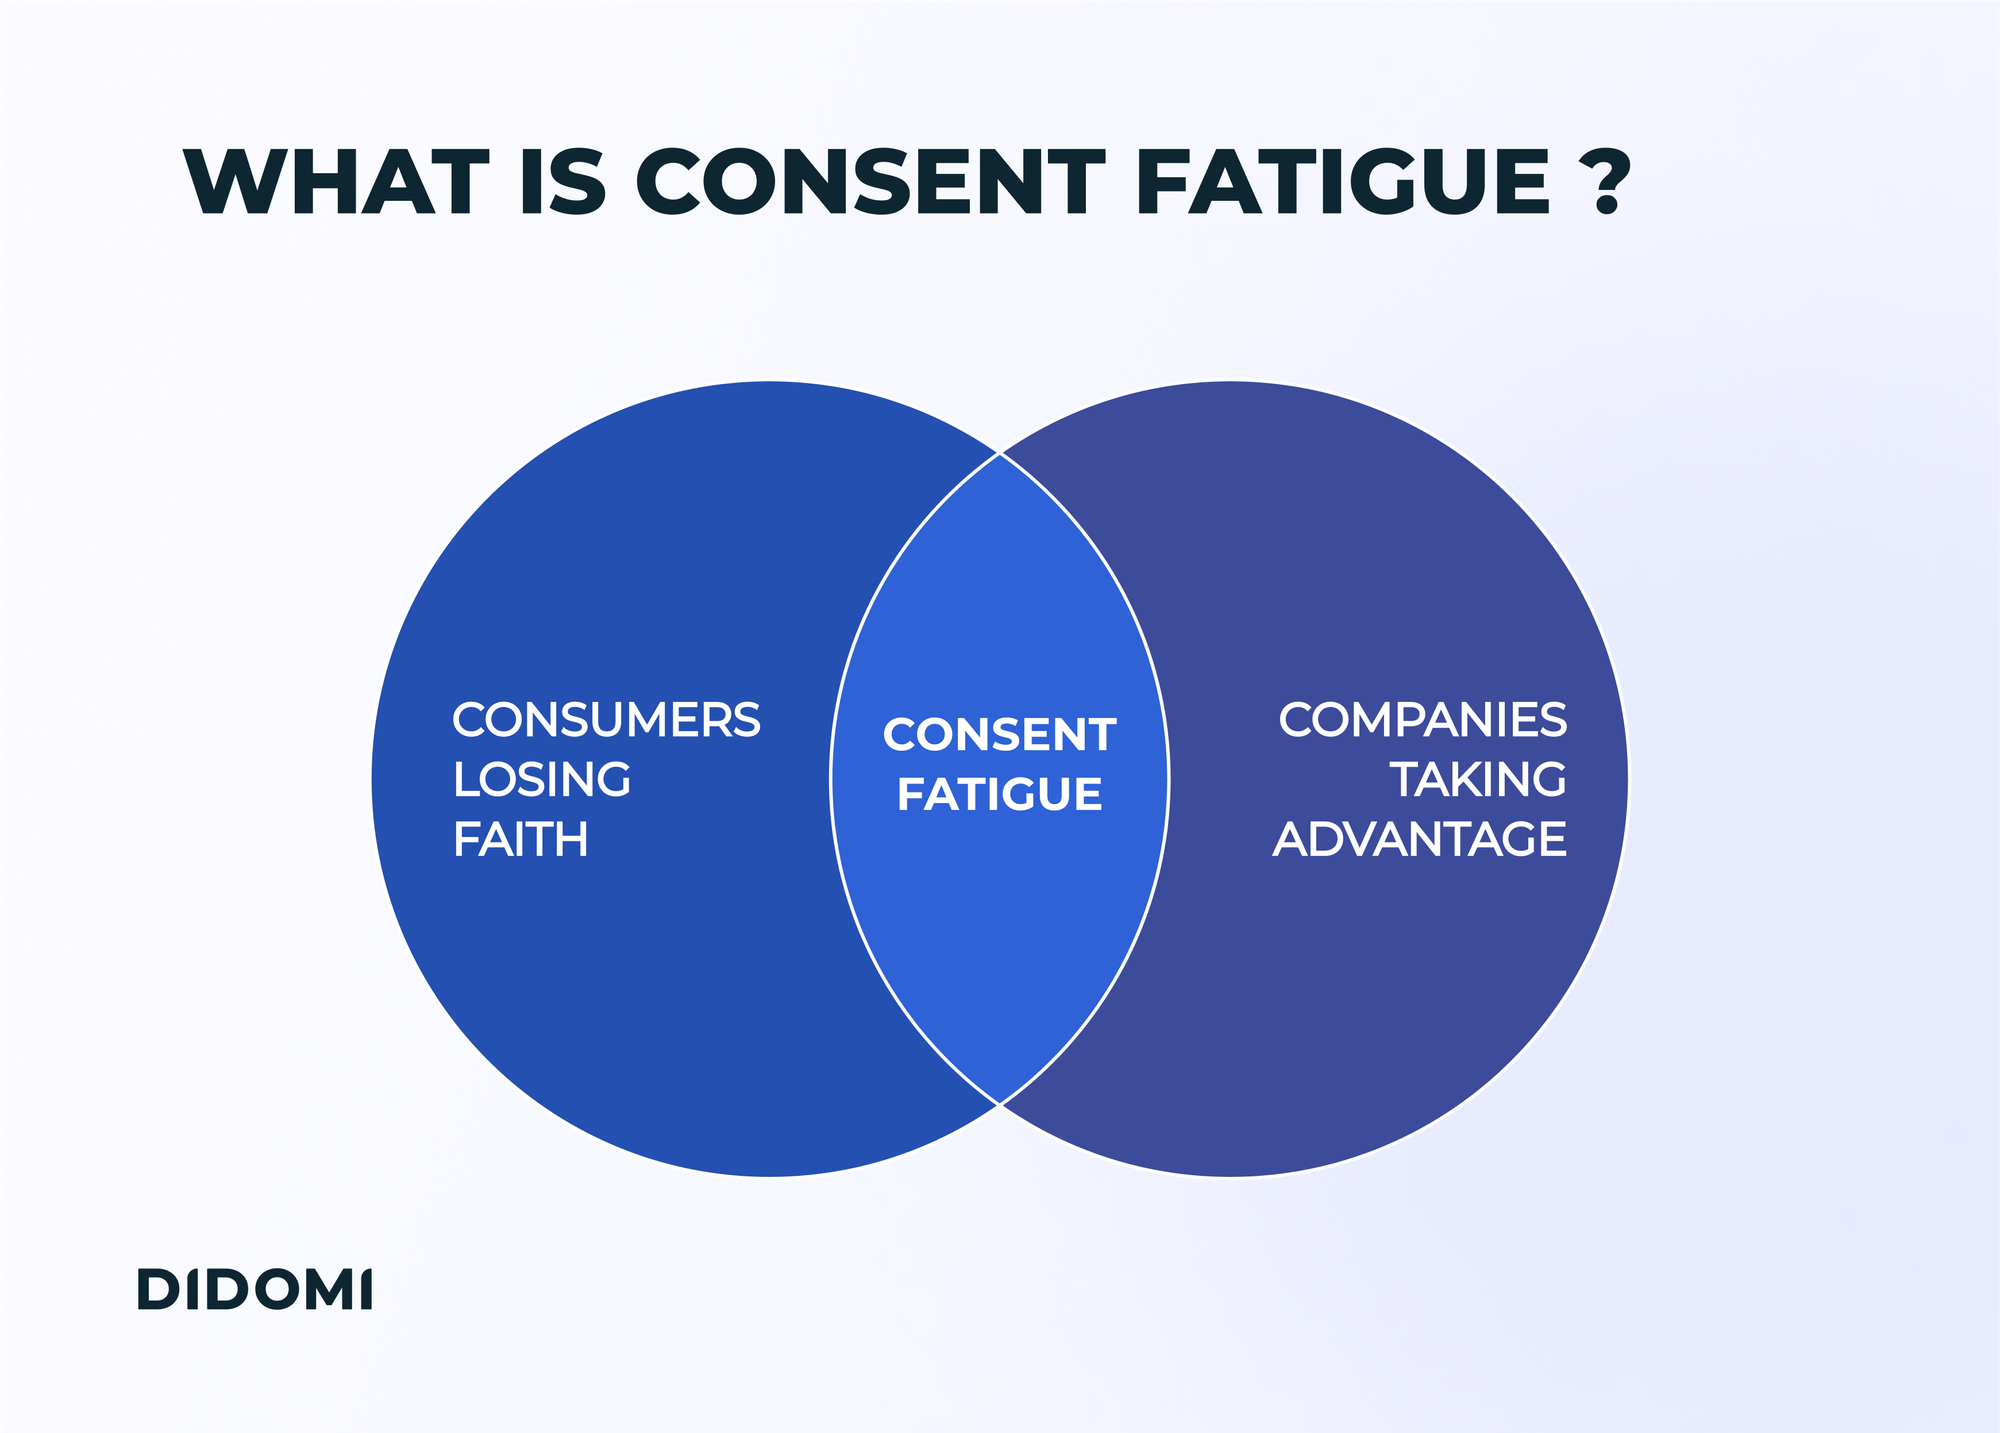 Didomi - What is consent fatigue matrix